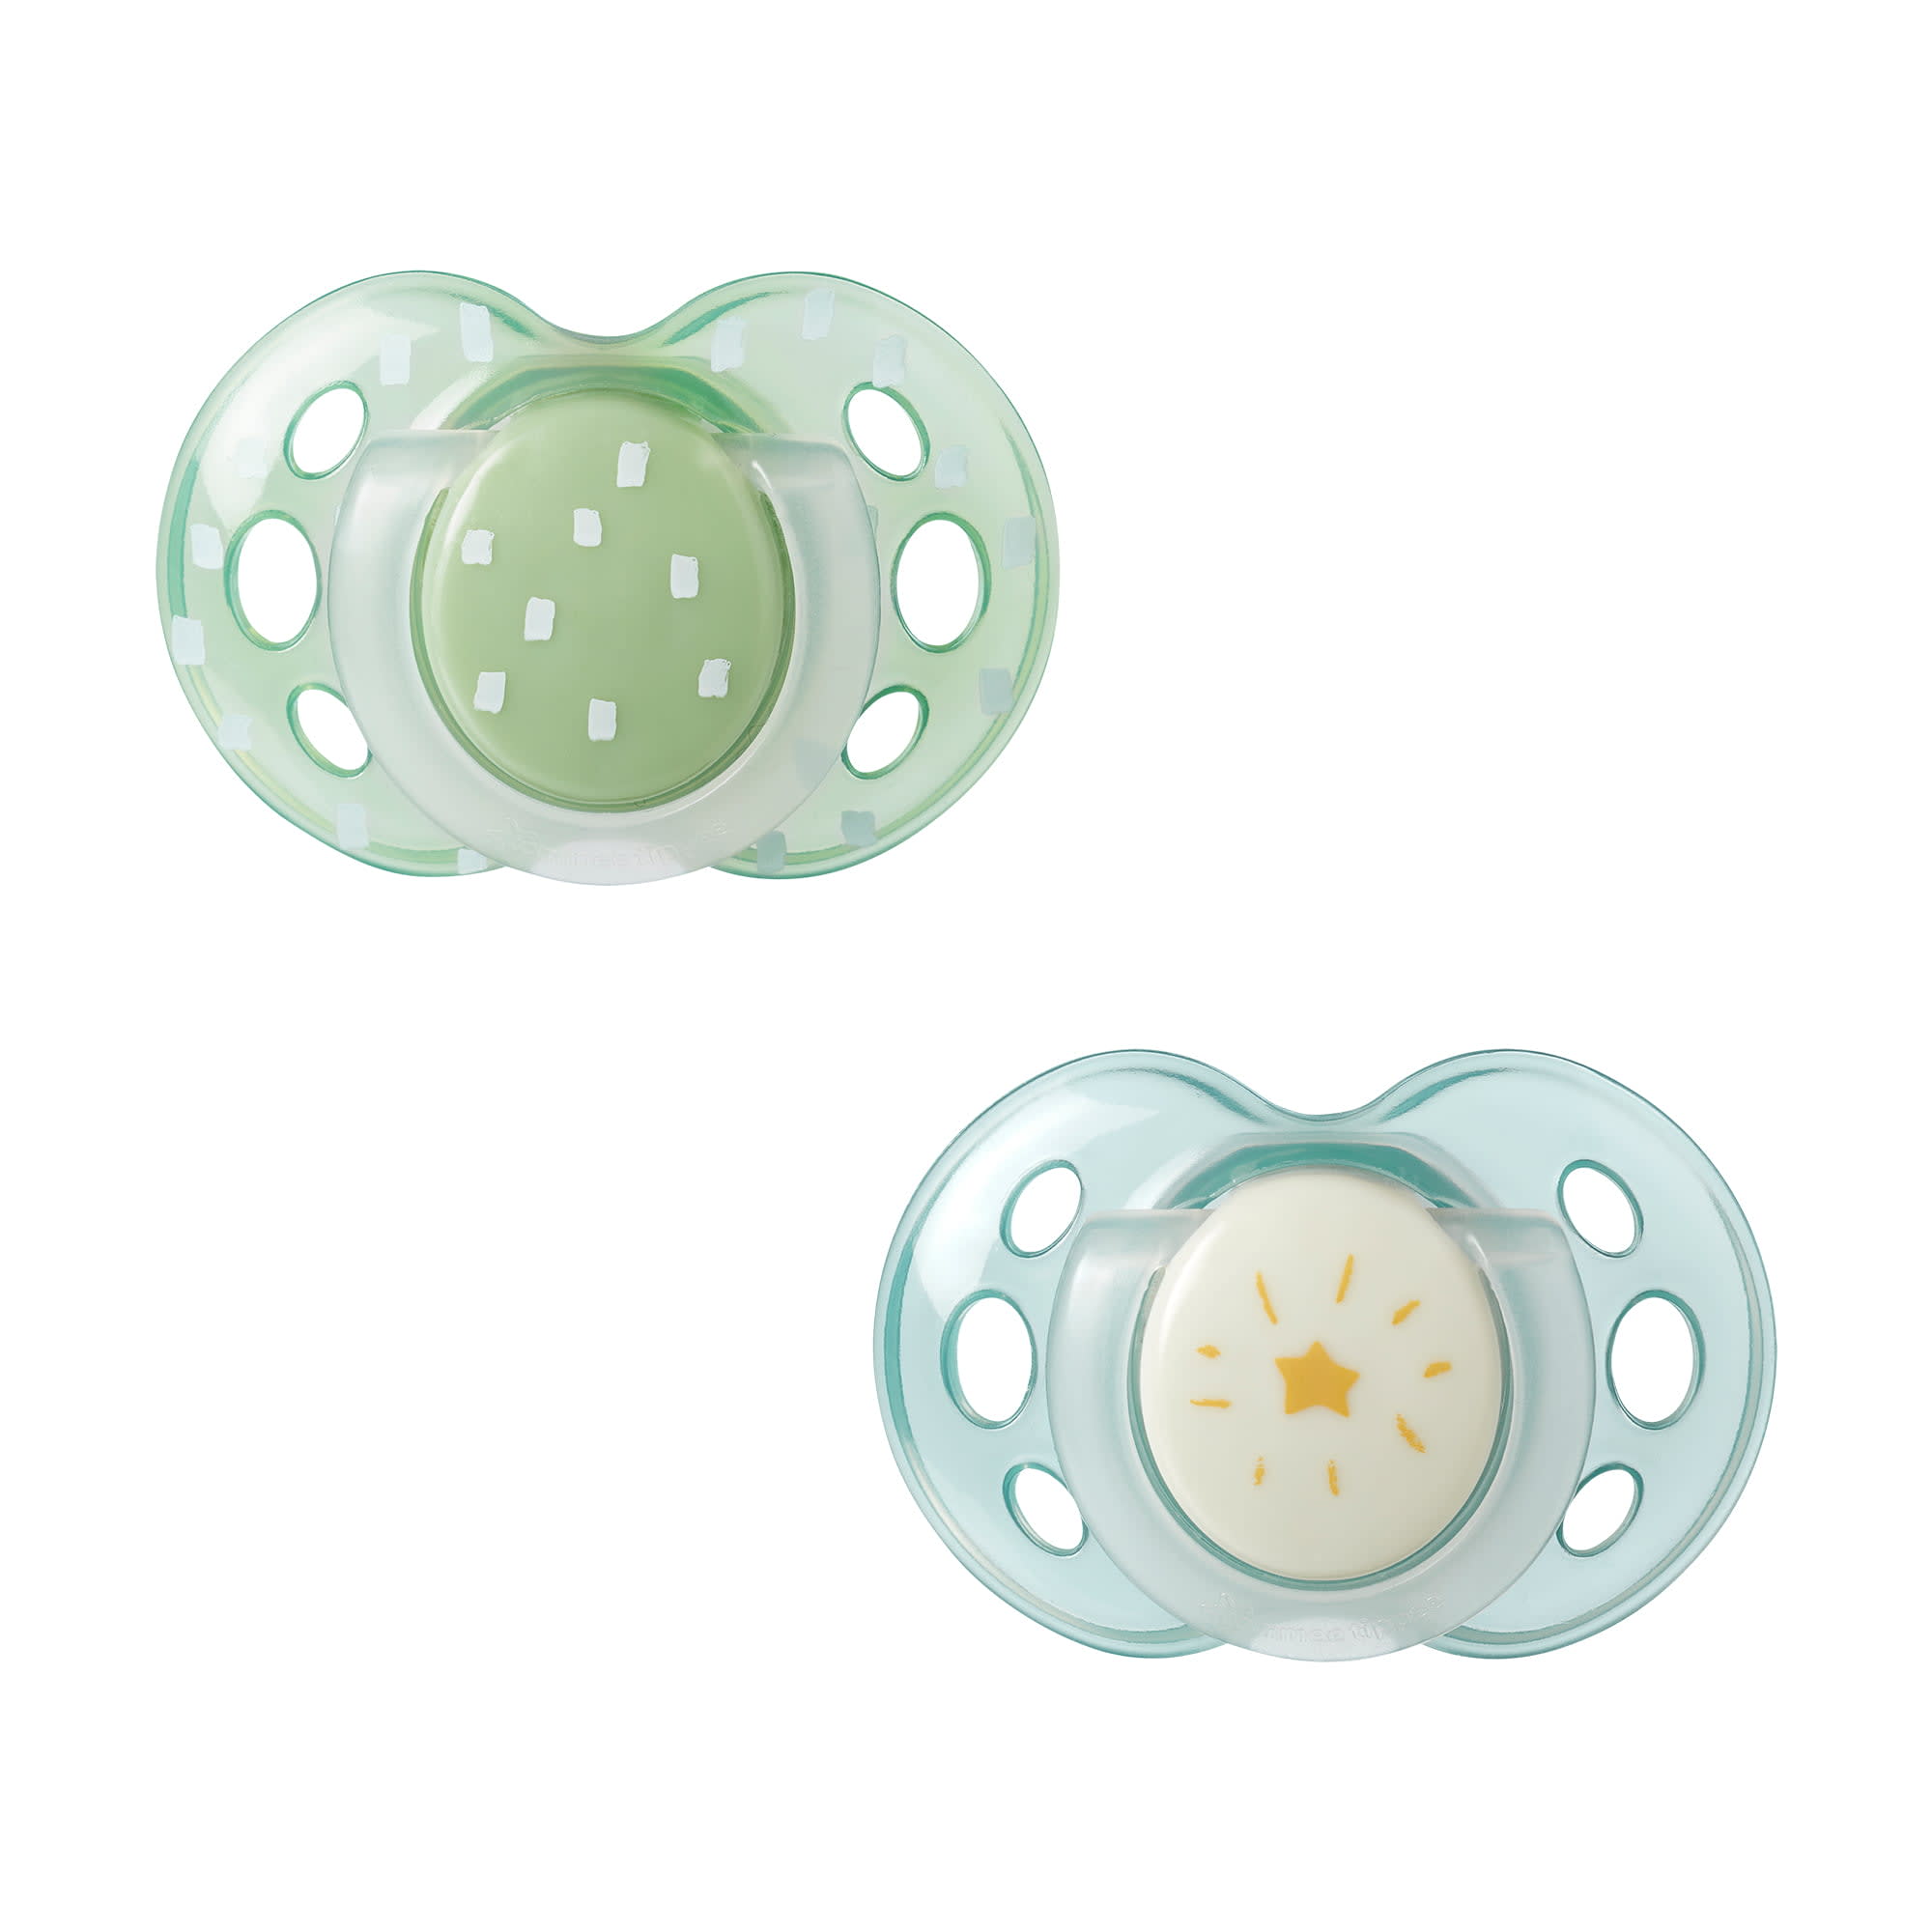 MAM Perfect Night Baby Pacifier Patented Nipple Glows in the Dark 2 Pack  6-16 Months Boy (Design May Vary)